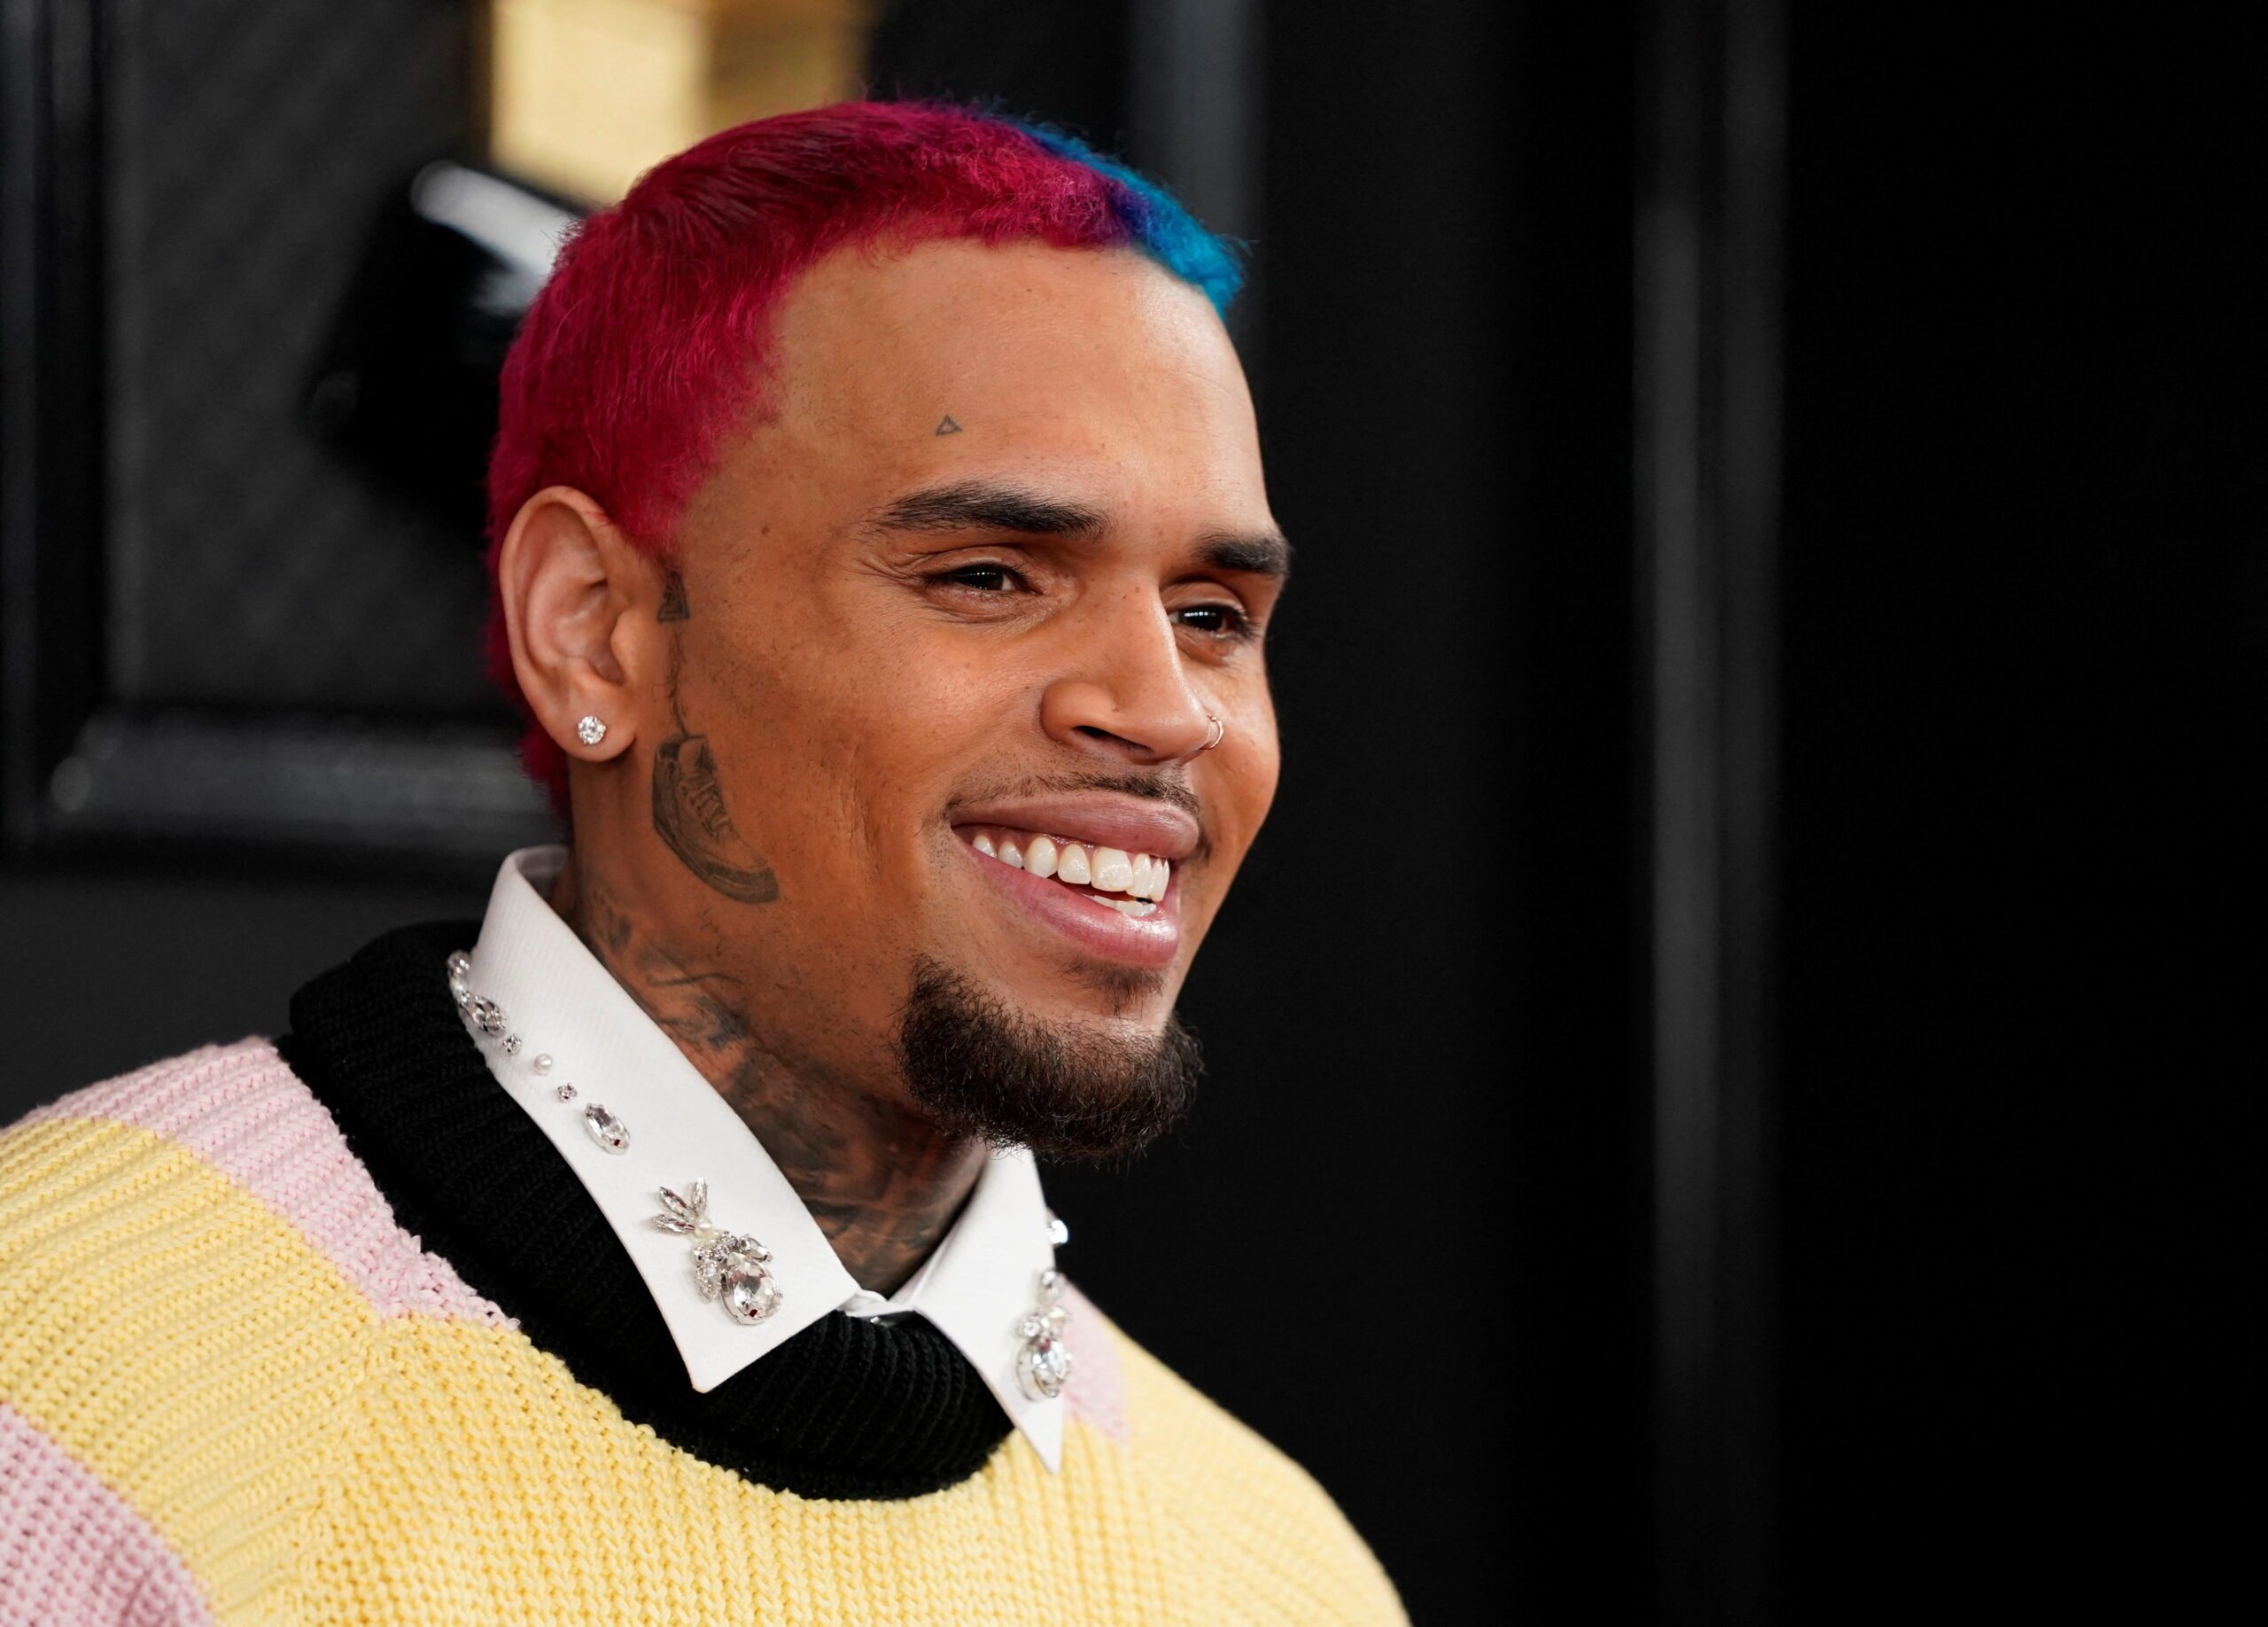 Chris Brown accused of raping woman on yacht